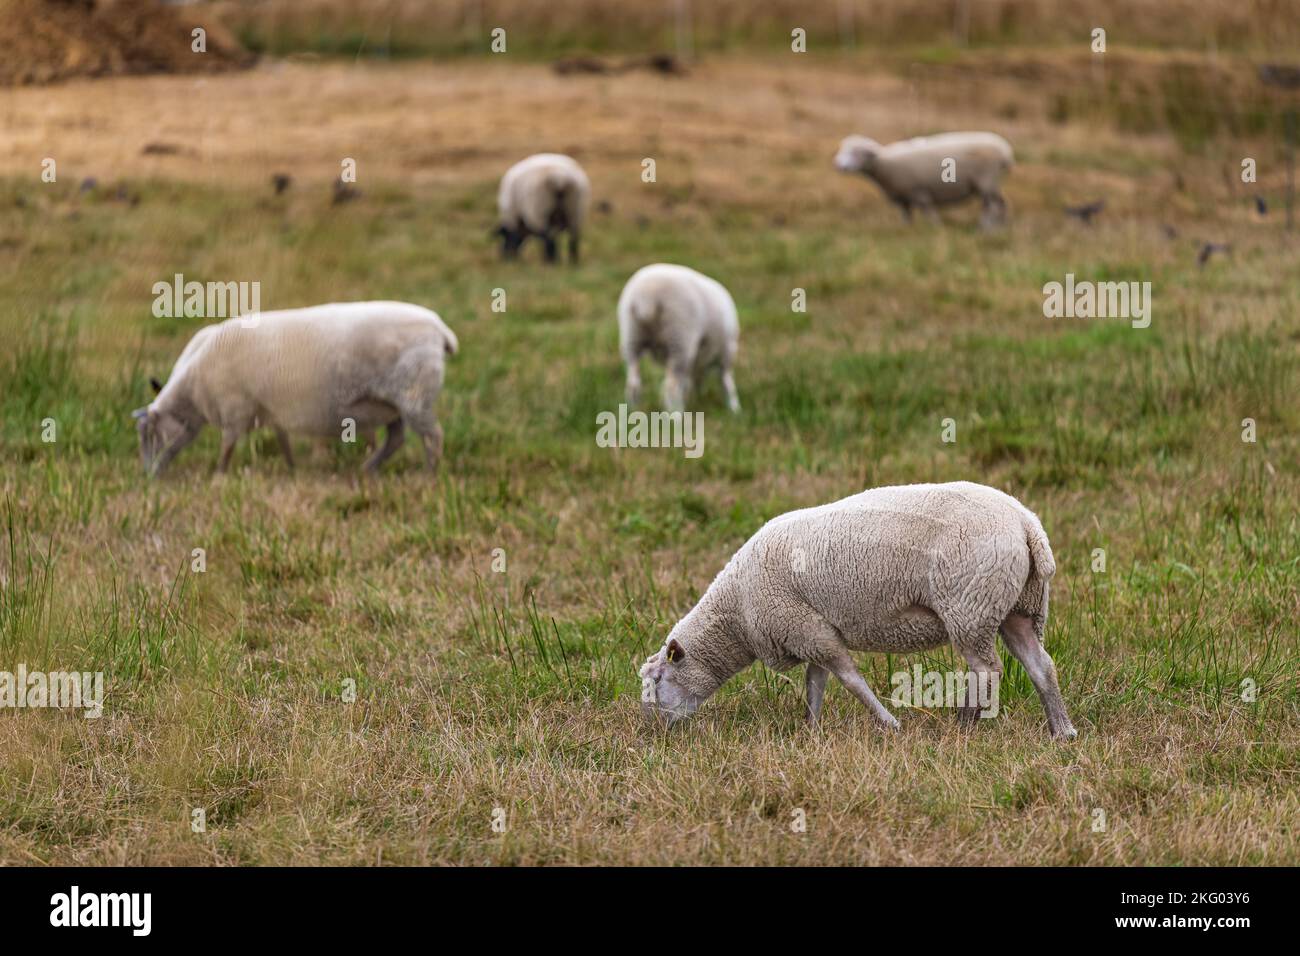 Herd of sheep on green pasture. A group of sheep on a pasture stand next to each other. Sheep graze in the meadow and the concept of economics, agricu Stock Photo